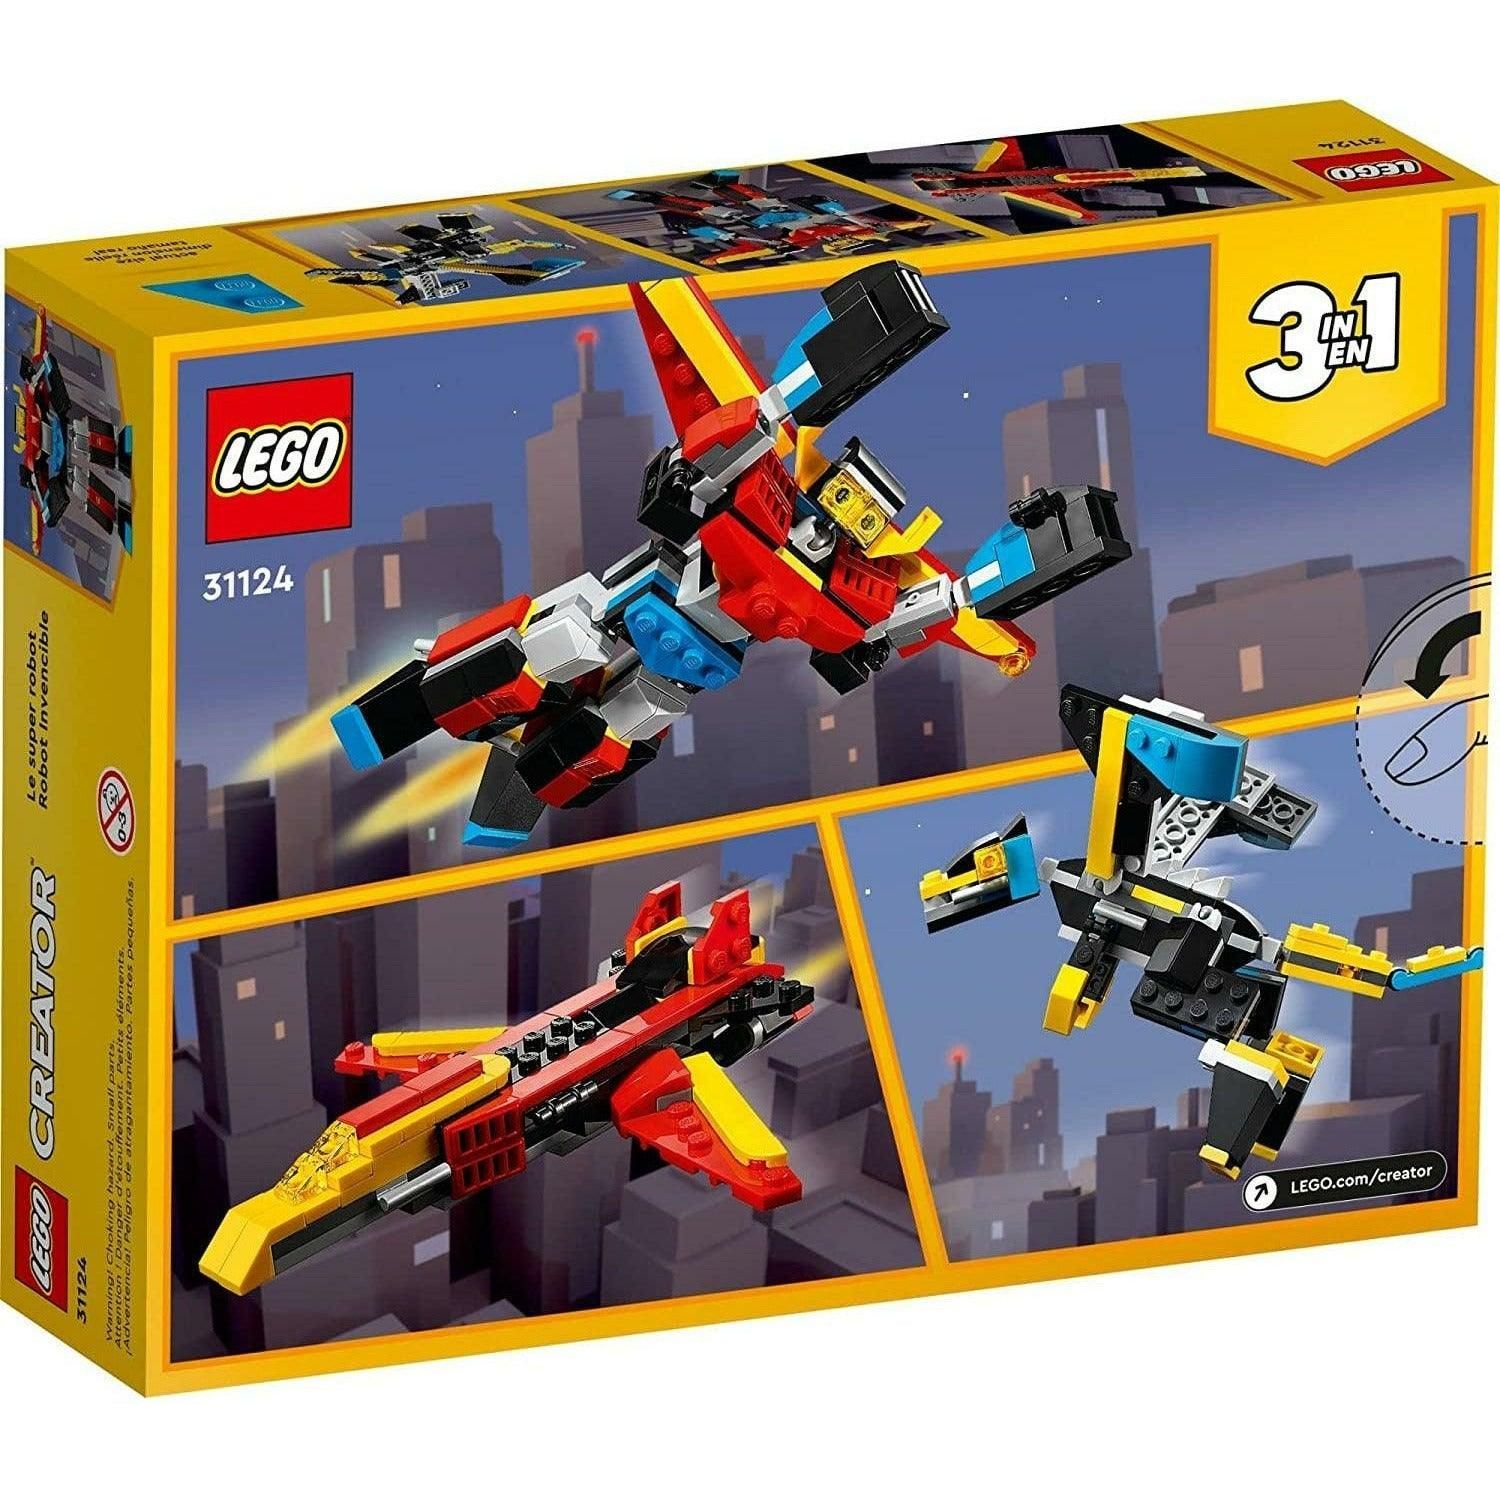 LEGO Creator 3in1 Super Robot 31124 Building Kit Featuring a Robot Toy, a Jet Airplane and a Dragon Model 159 Pieces - BumbleToys - 8+ Years, 8-13 Years, Boys, Creator, Creator 3In1, LEGO, OXE, Pre-Order